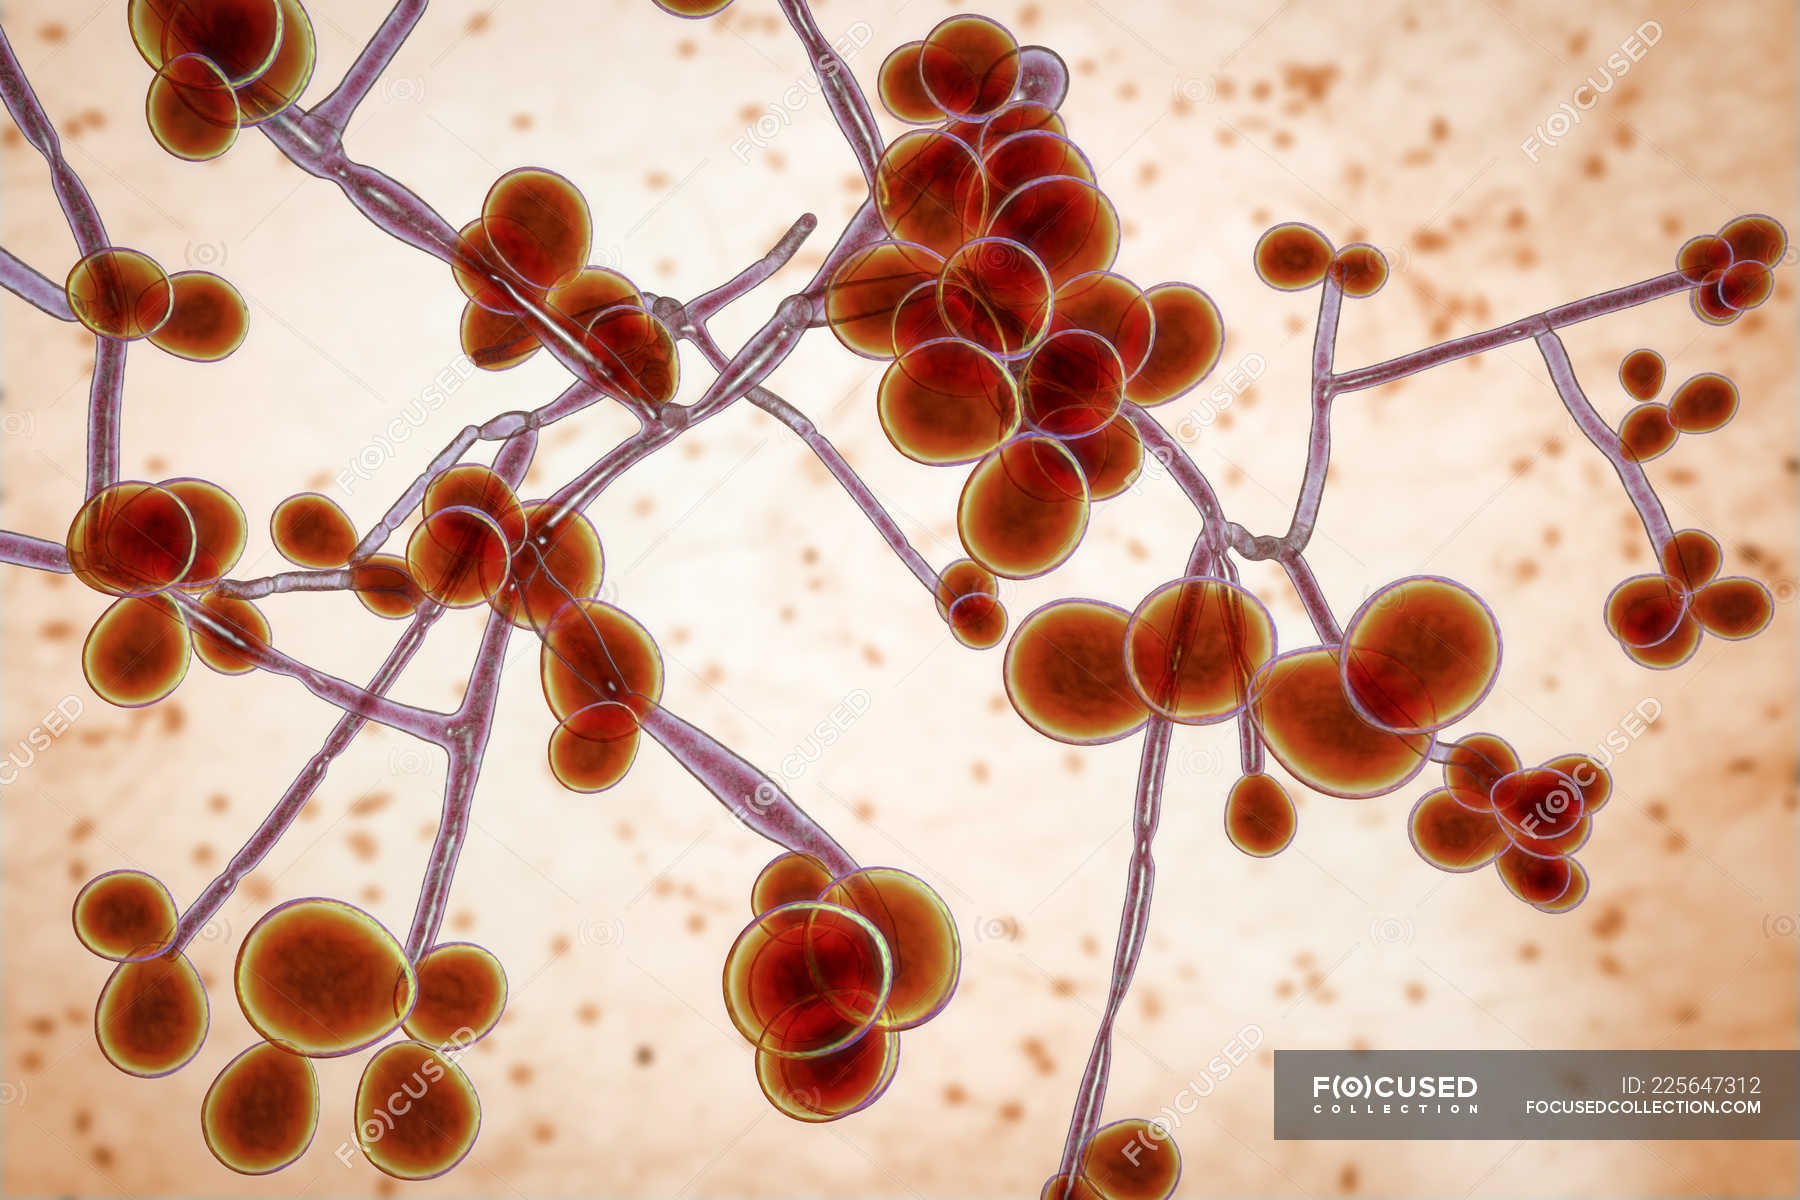 Digital Illustration Of Yeast And Hyphae Stages Of Candida Albicans Fungus — Disorder Artwork 